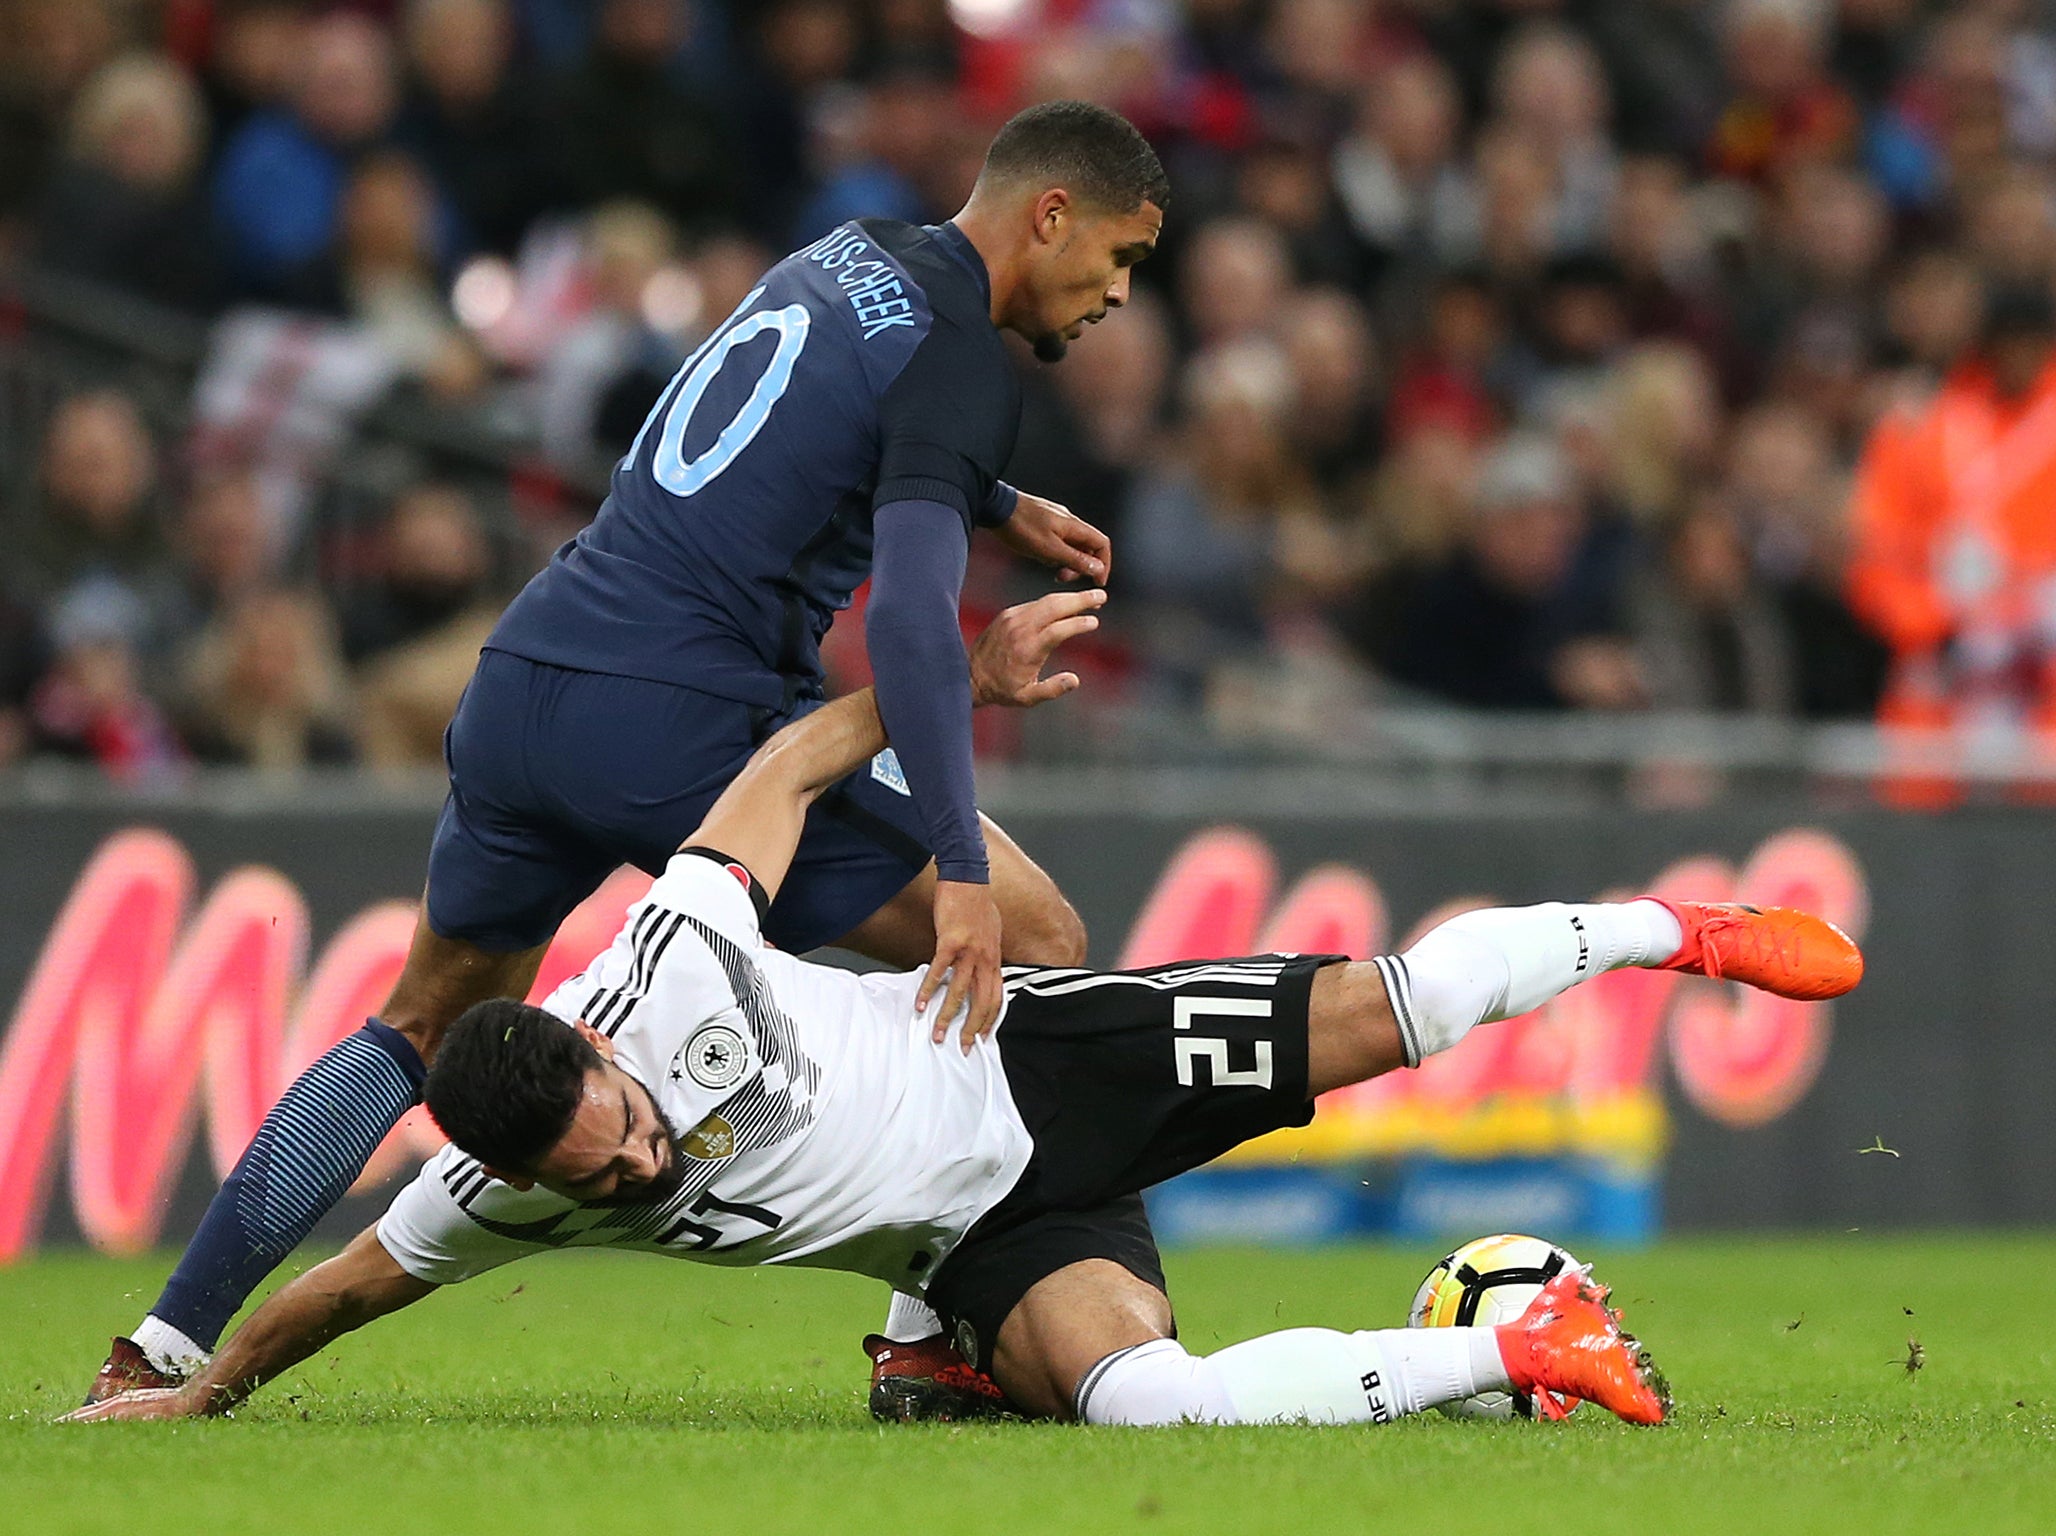 Loftus-Cheek appeared assured and assertive on his international debut